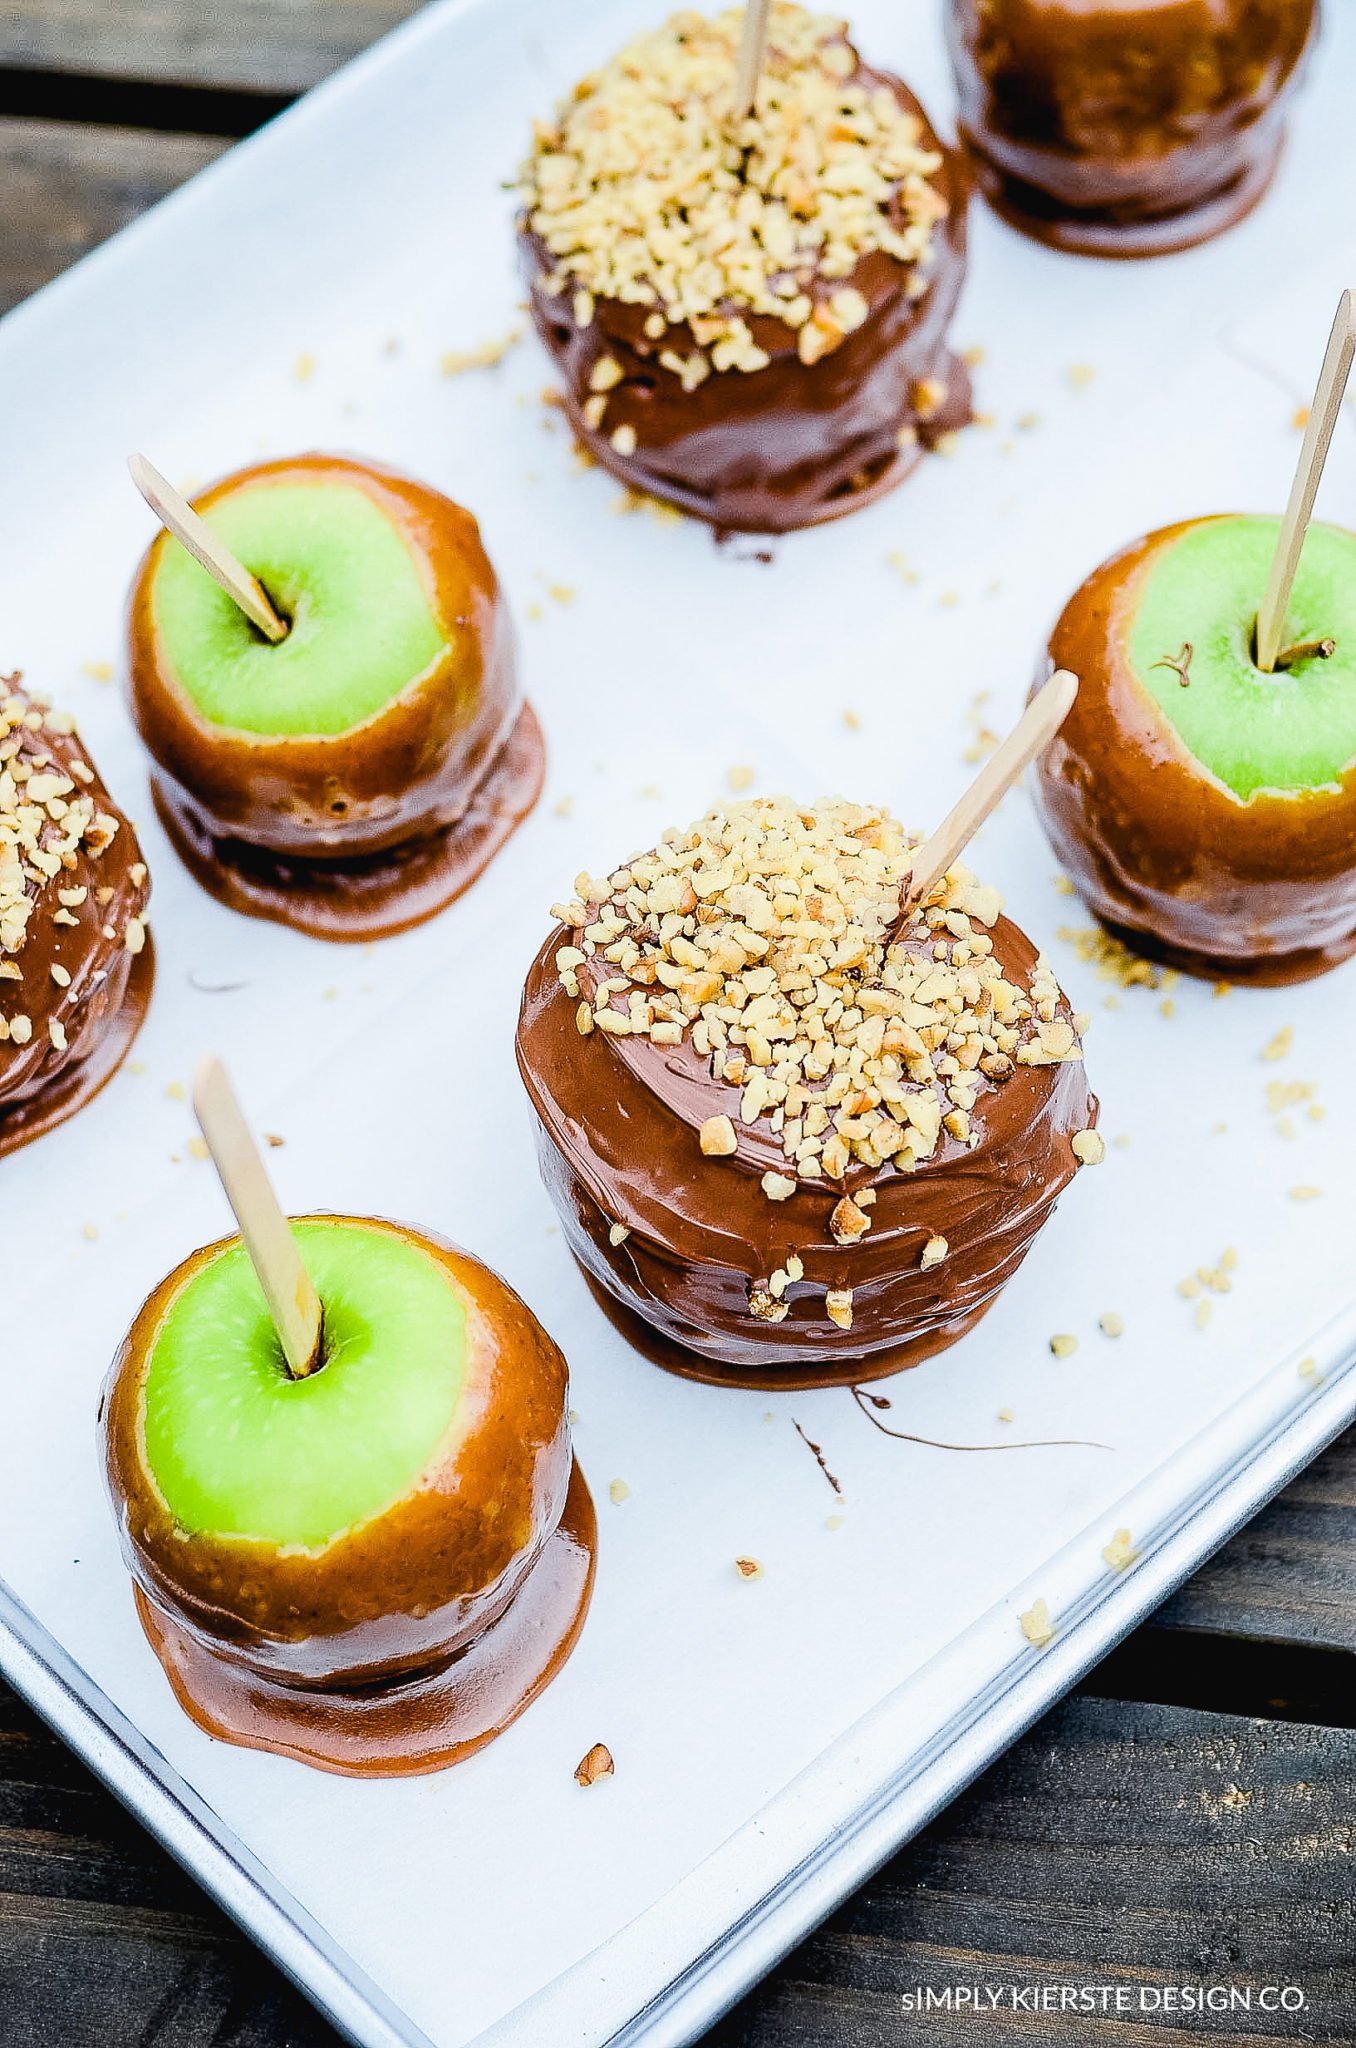 How to Make Perfect Caramel Apples: Recipe,Tips & Tricks